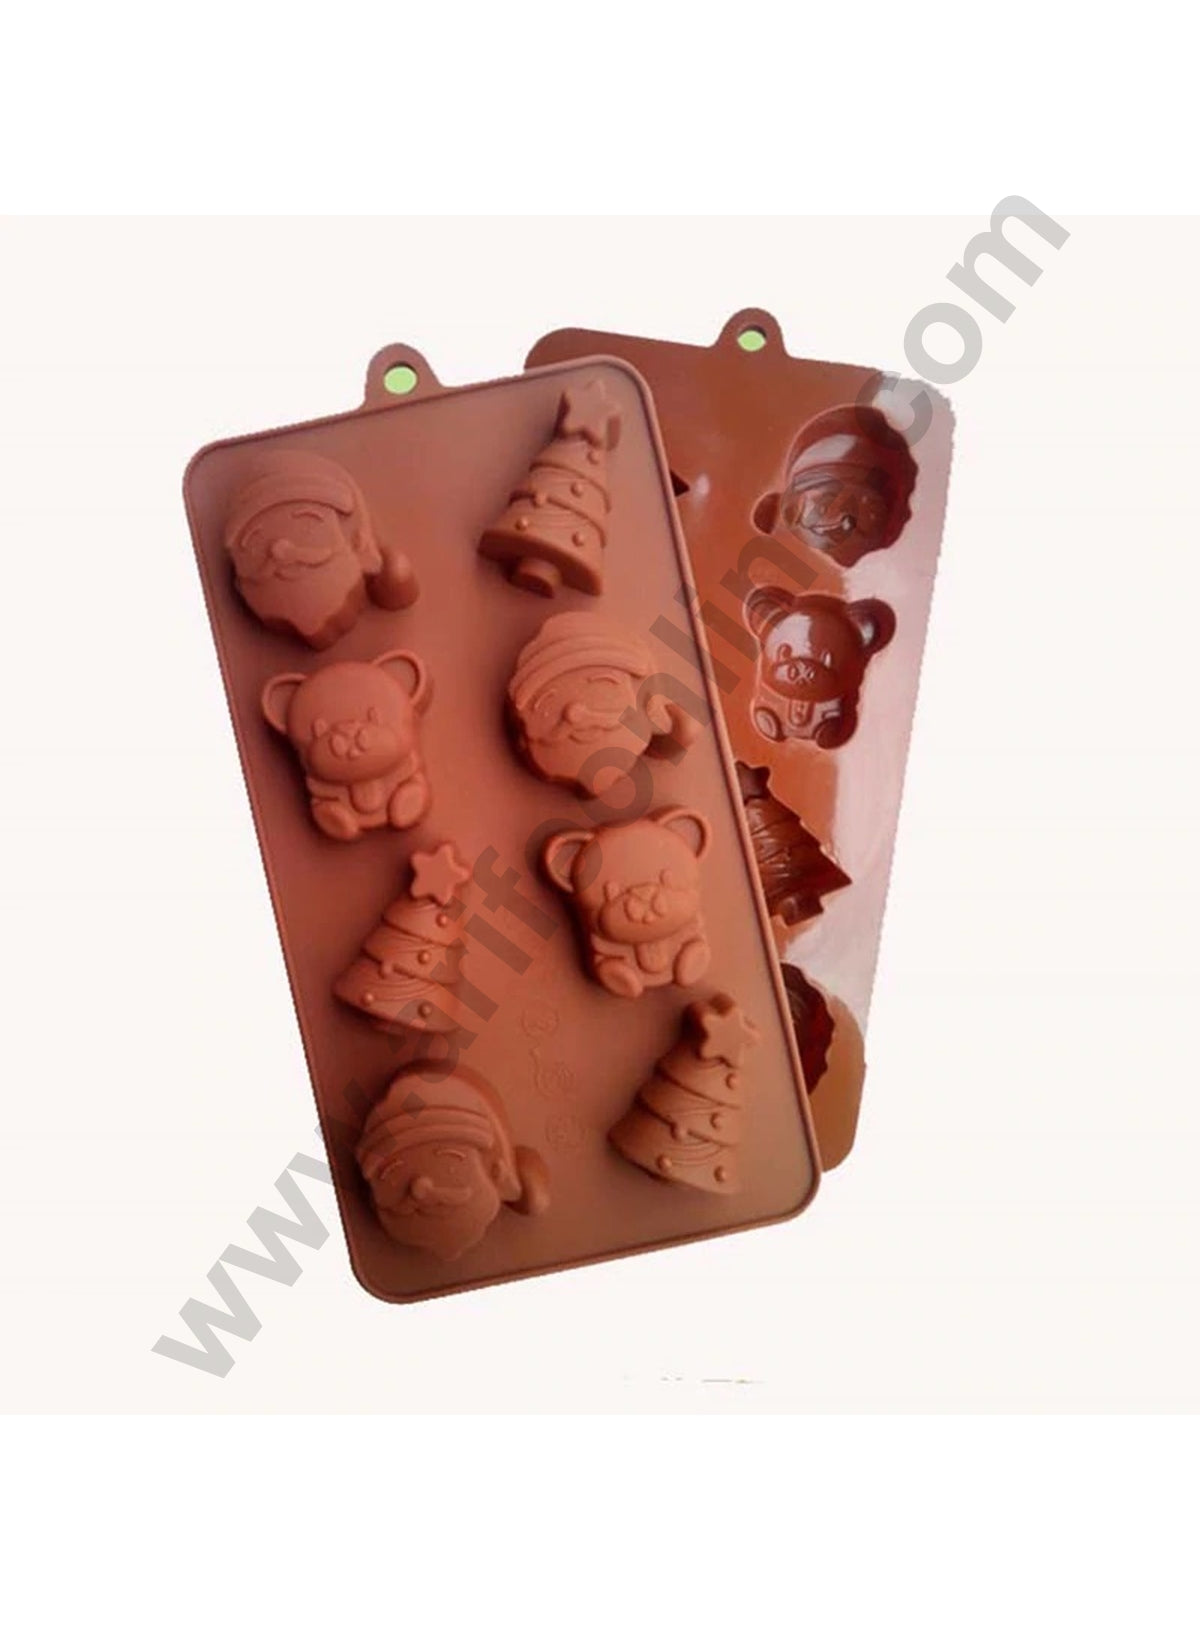 Silicone Christmas Theme Chocolate Mould - Cavity 15 (Color - Brown)